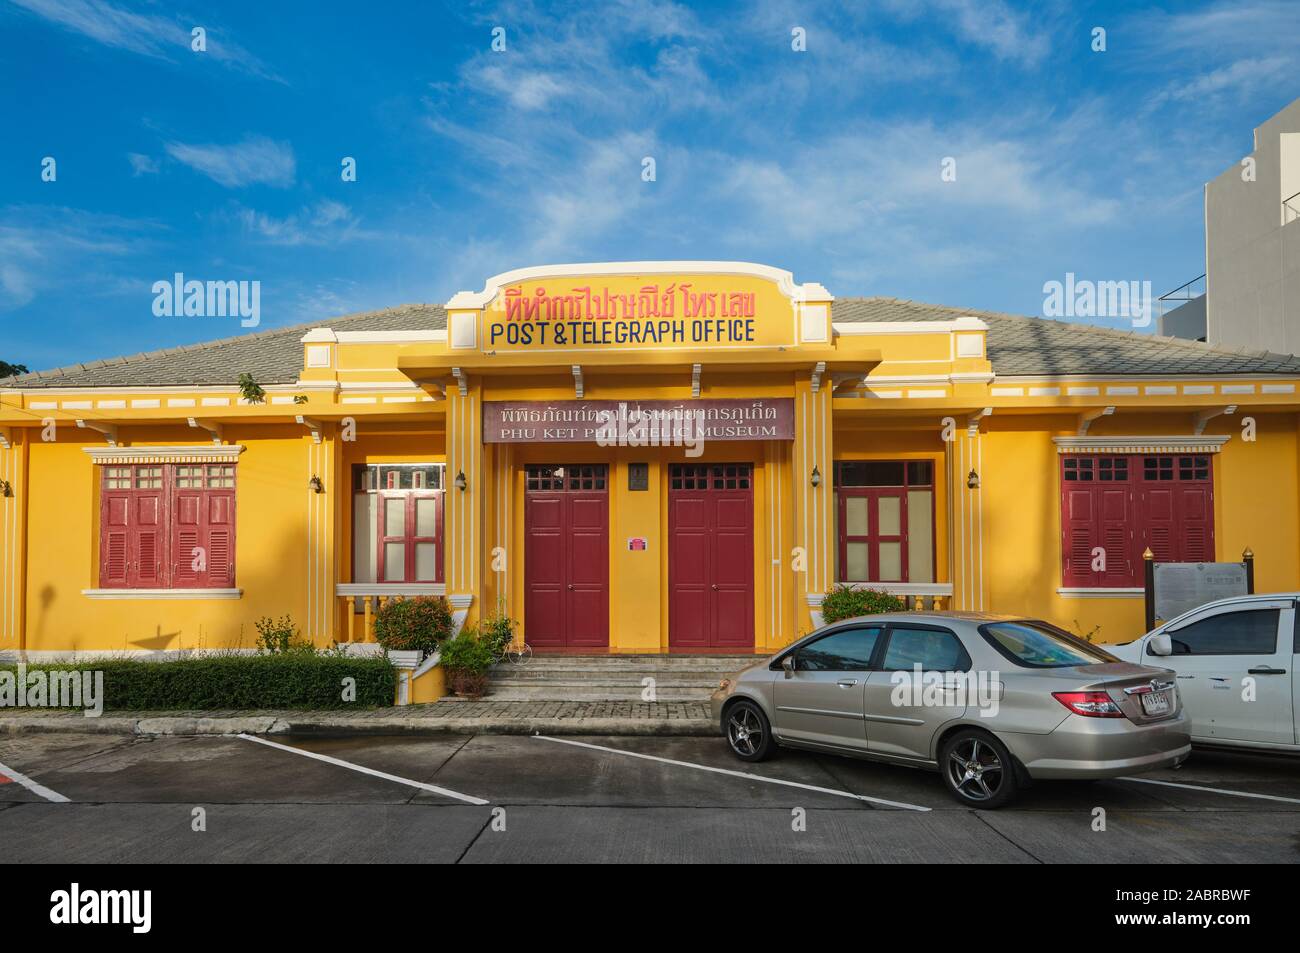 Post and Telegraph Office with Philatelic Museum in Phuket Town, Thailand Stock Photo